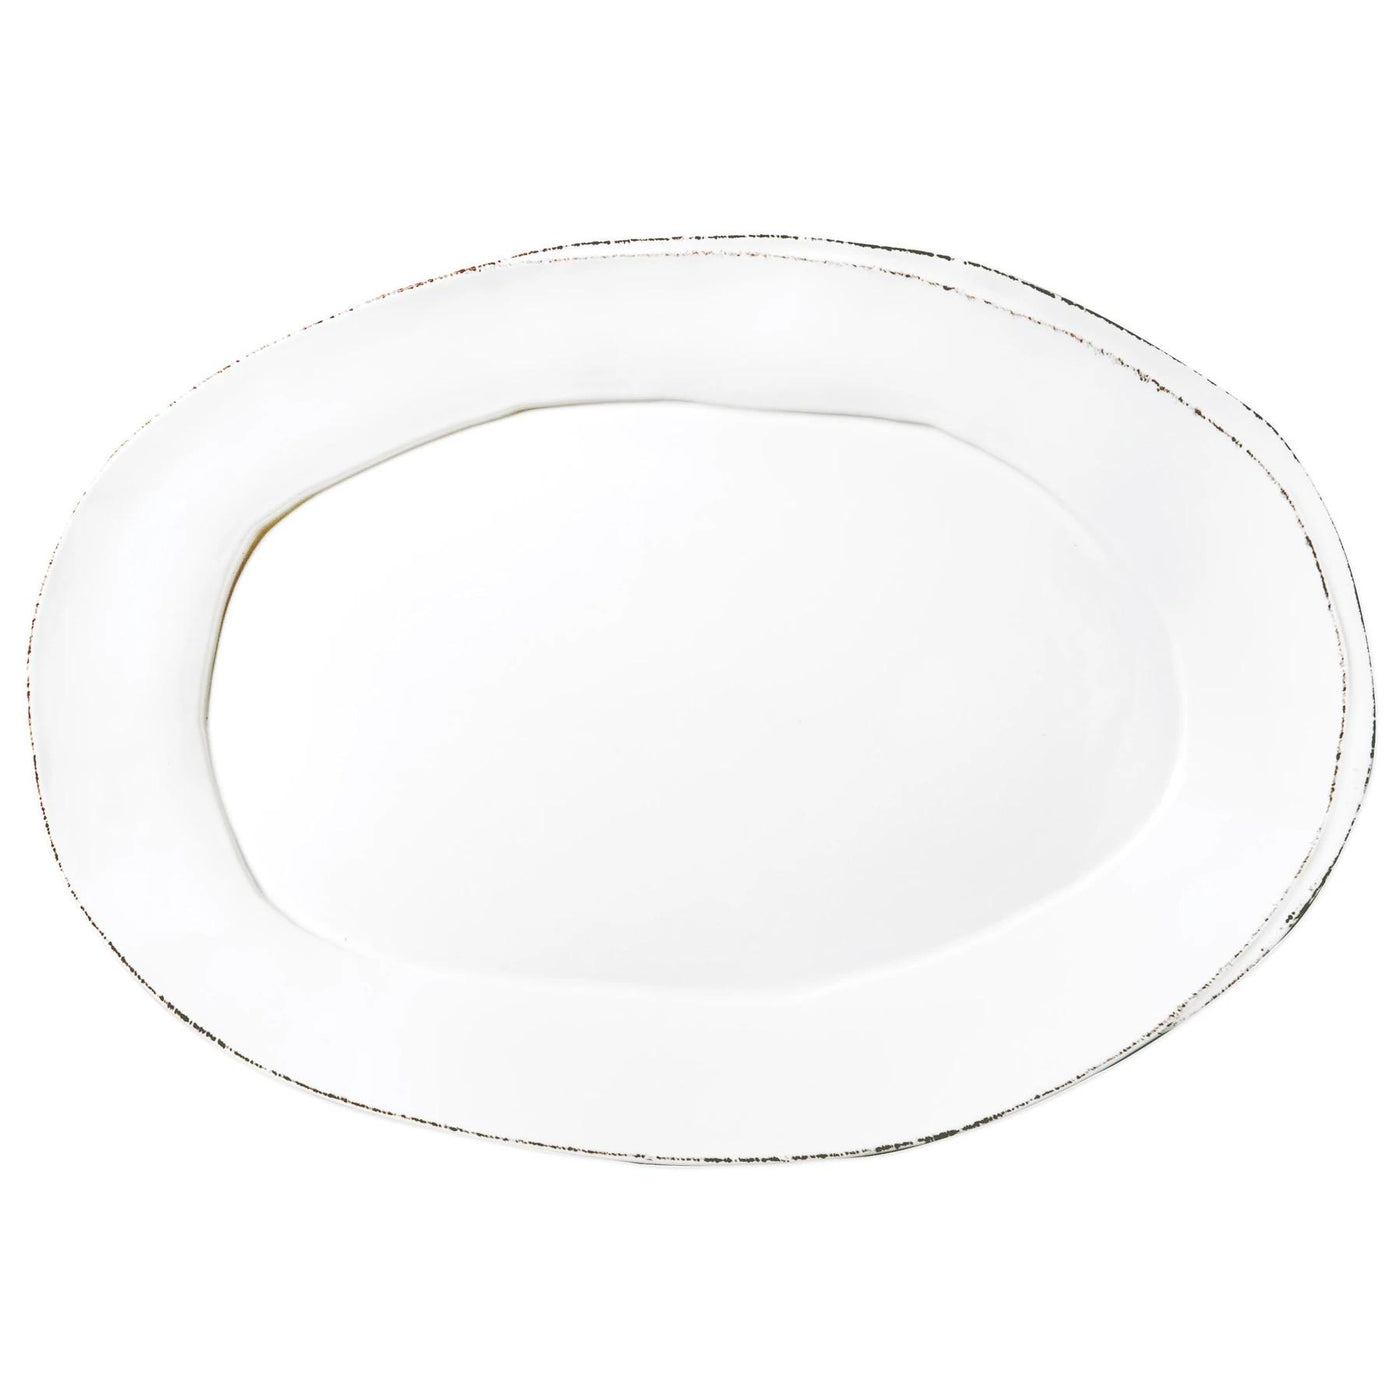 Vietri Lastra Oval Platter-HOME/GIFTWARE-Kevin's Fine Outdoor Gear & Apparel